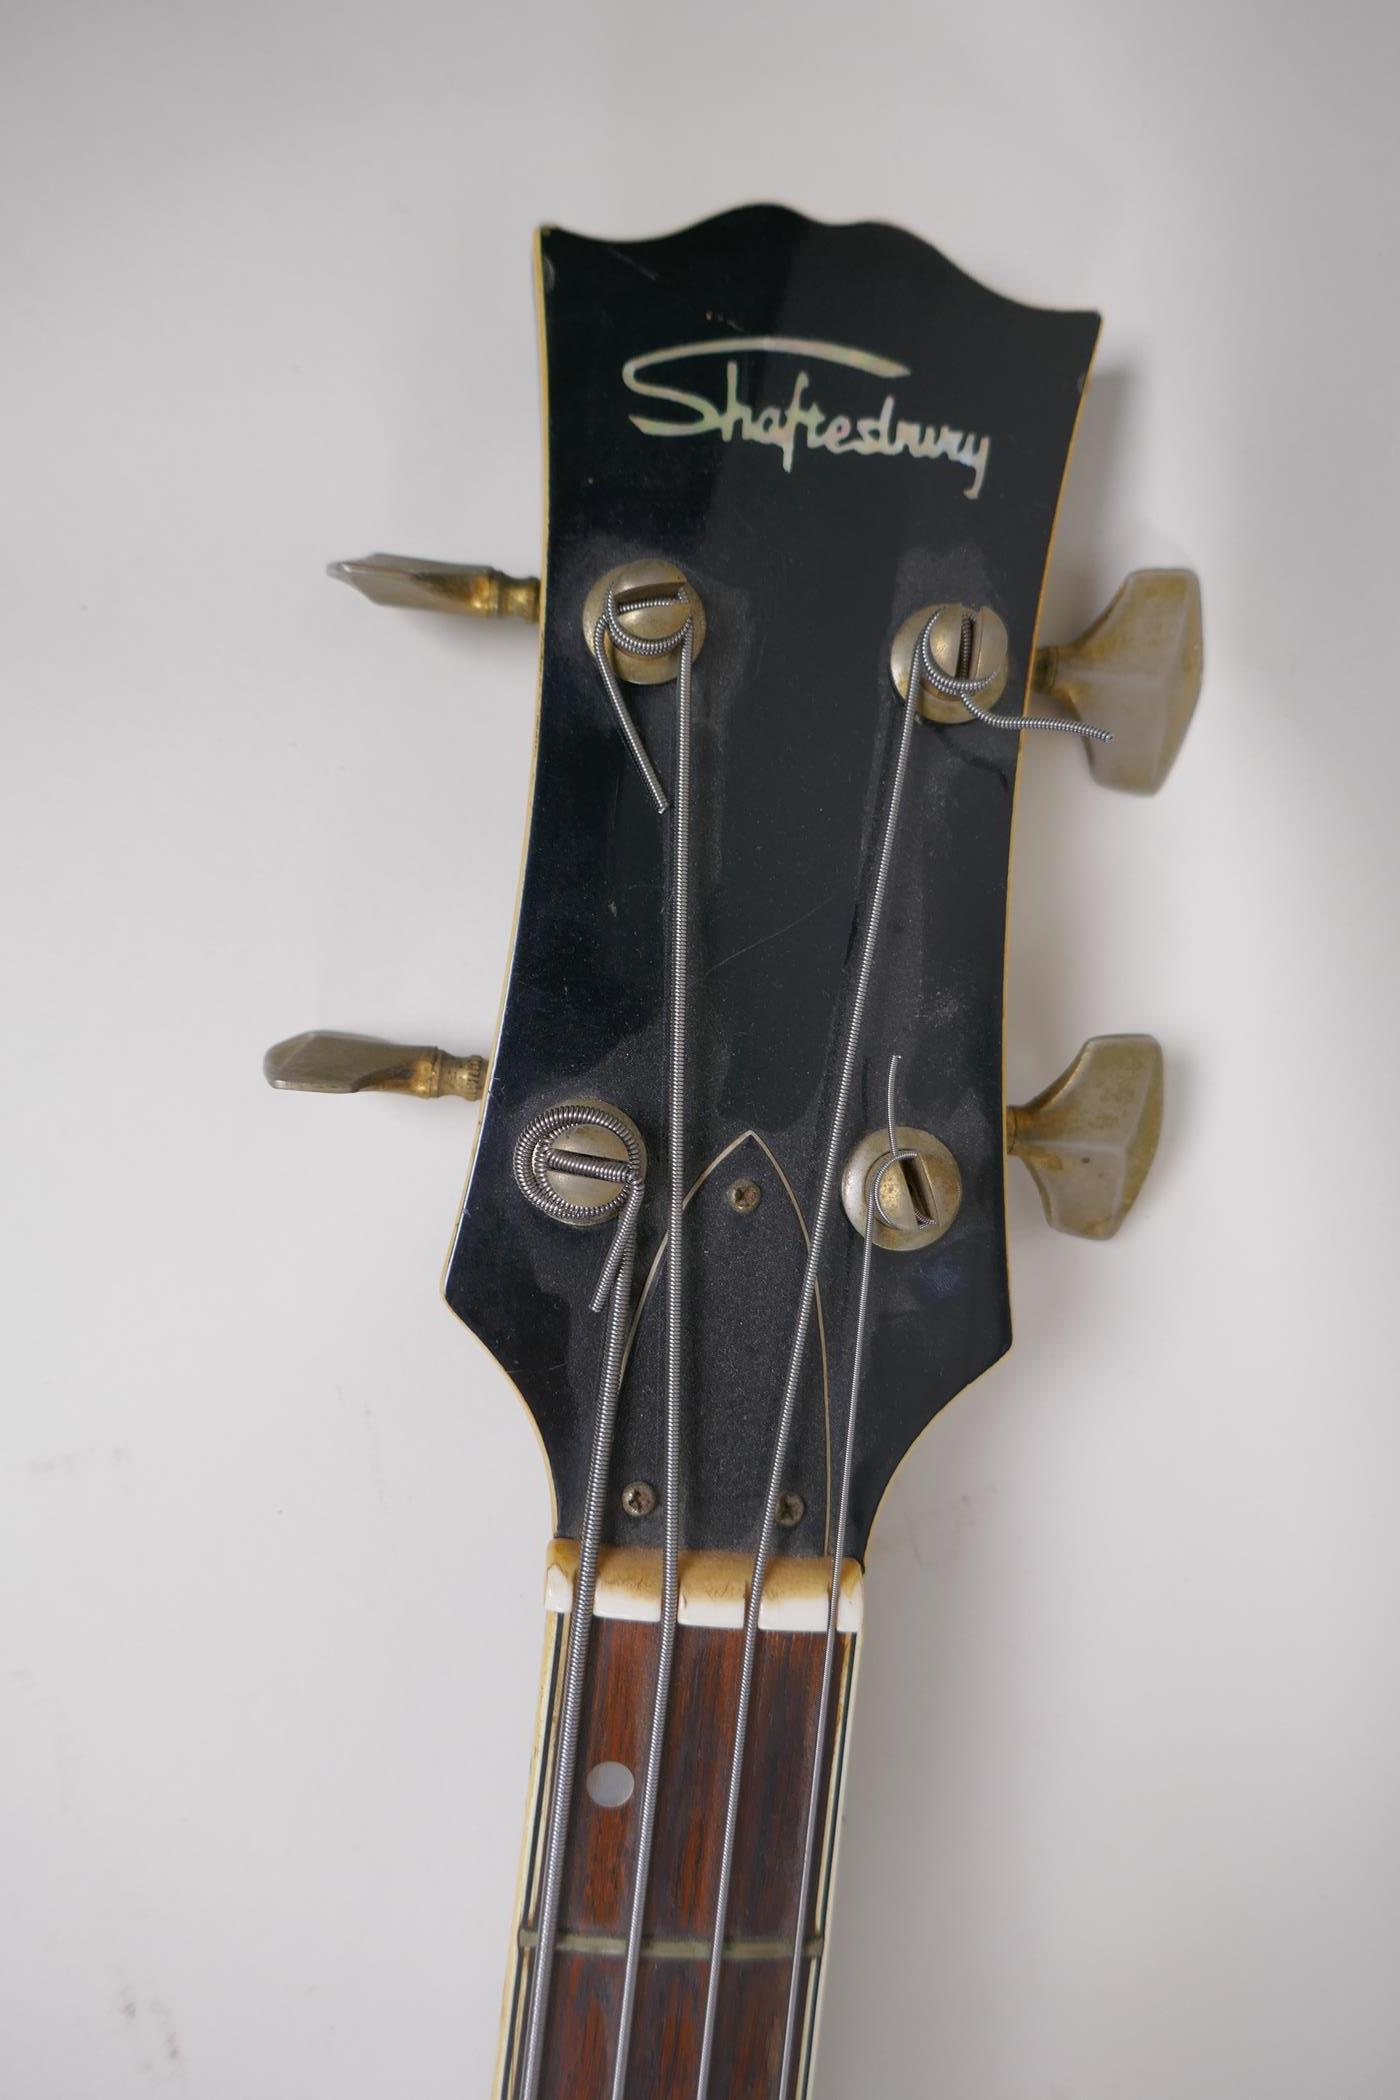 A vintage Japanese built Shaftesbury bass guitar with Les Paul shaped body, 110cm long - Image 4 of 5